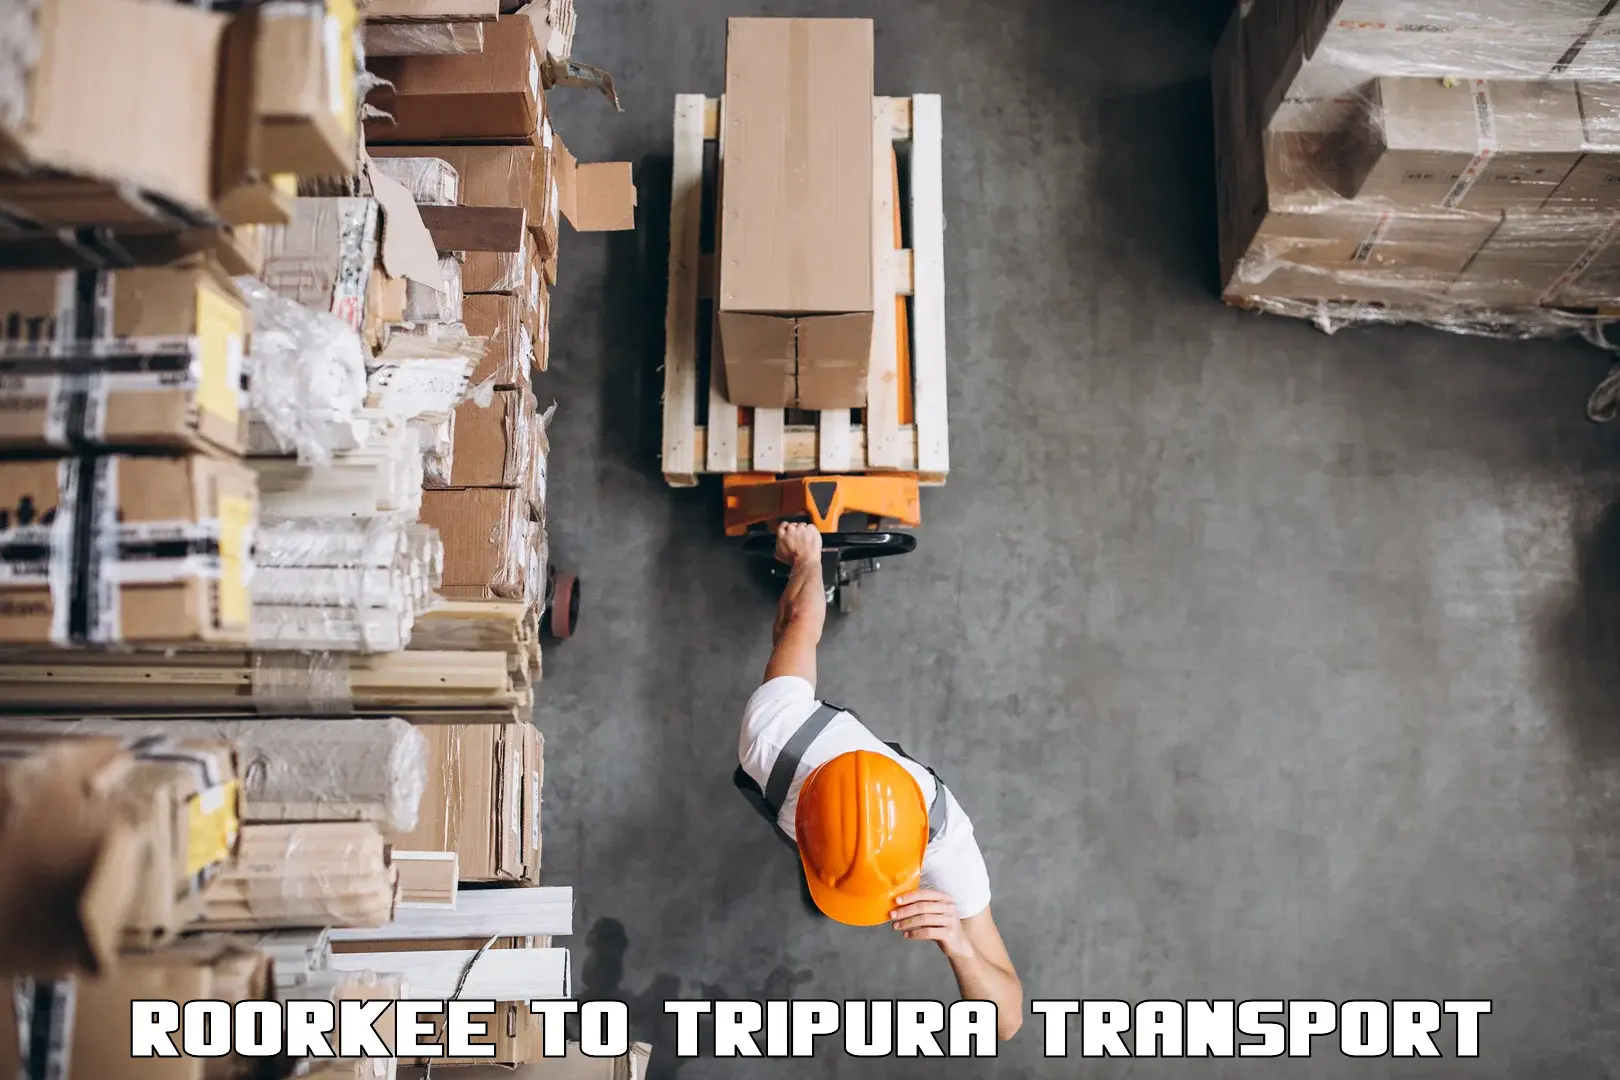 Daily parcel service transport Roorkee to Udaipur Tripura